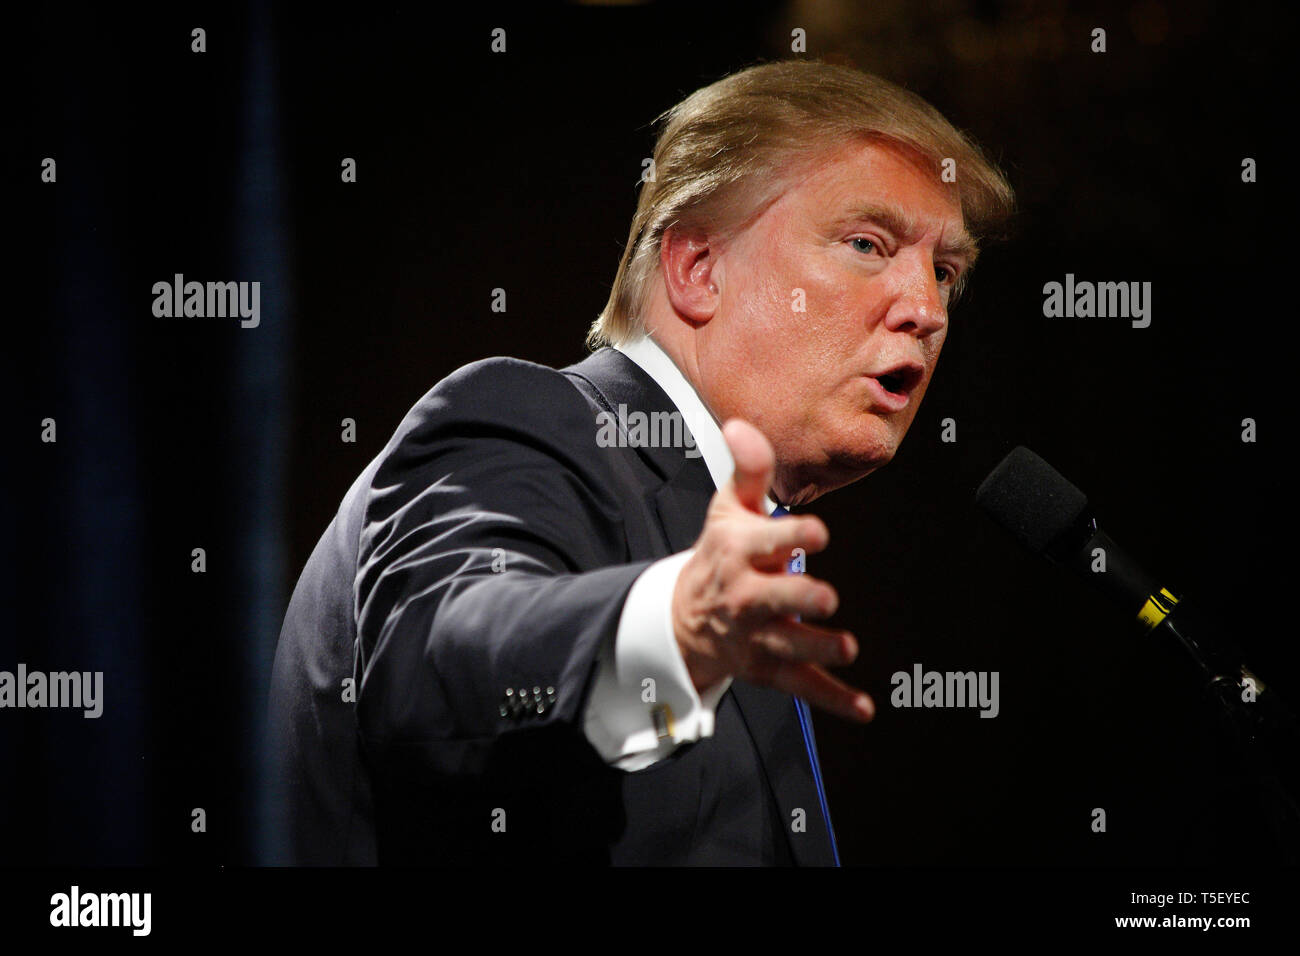 Real Estater and TV Entertainer Donald J. Trump is flirting with the idea of running for President in the 2012 Election. Wednesday he made an important visit with the Nashua Chamber of Commerce in New Hampshire. Stock Photo